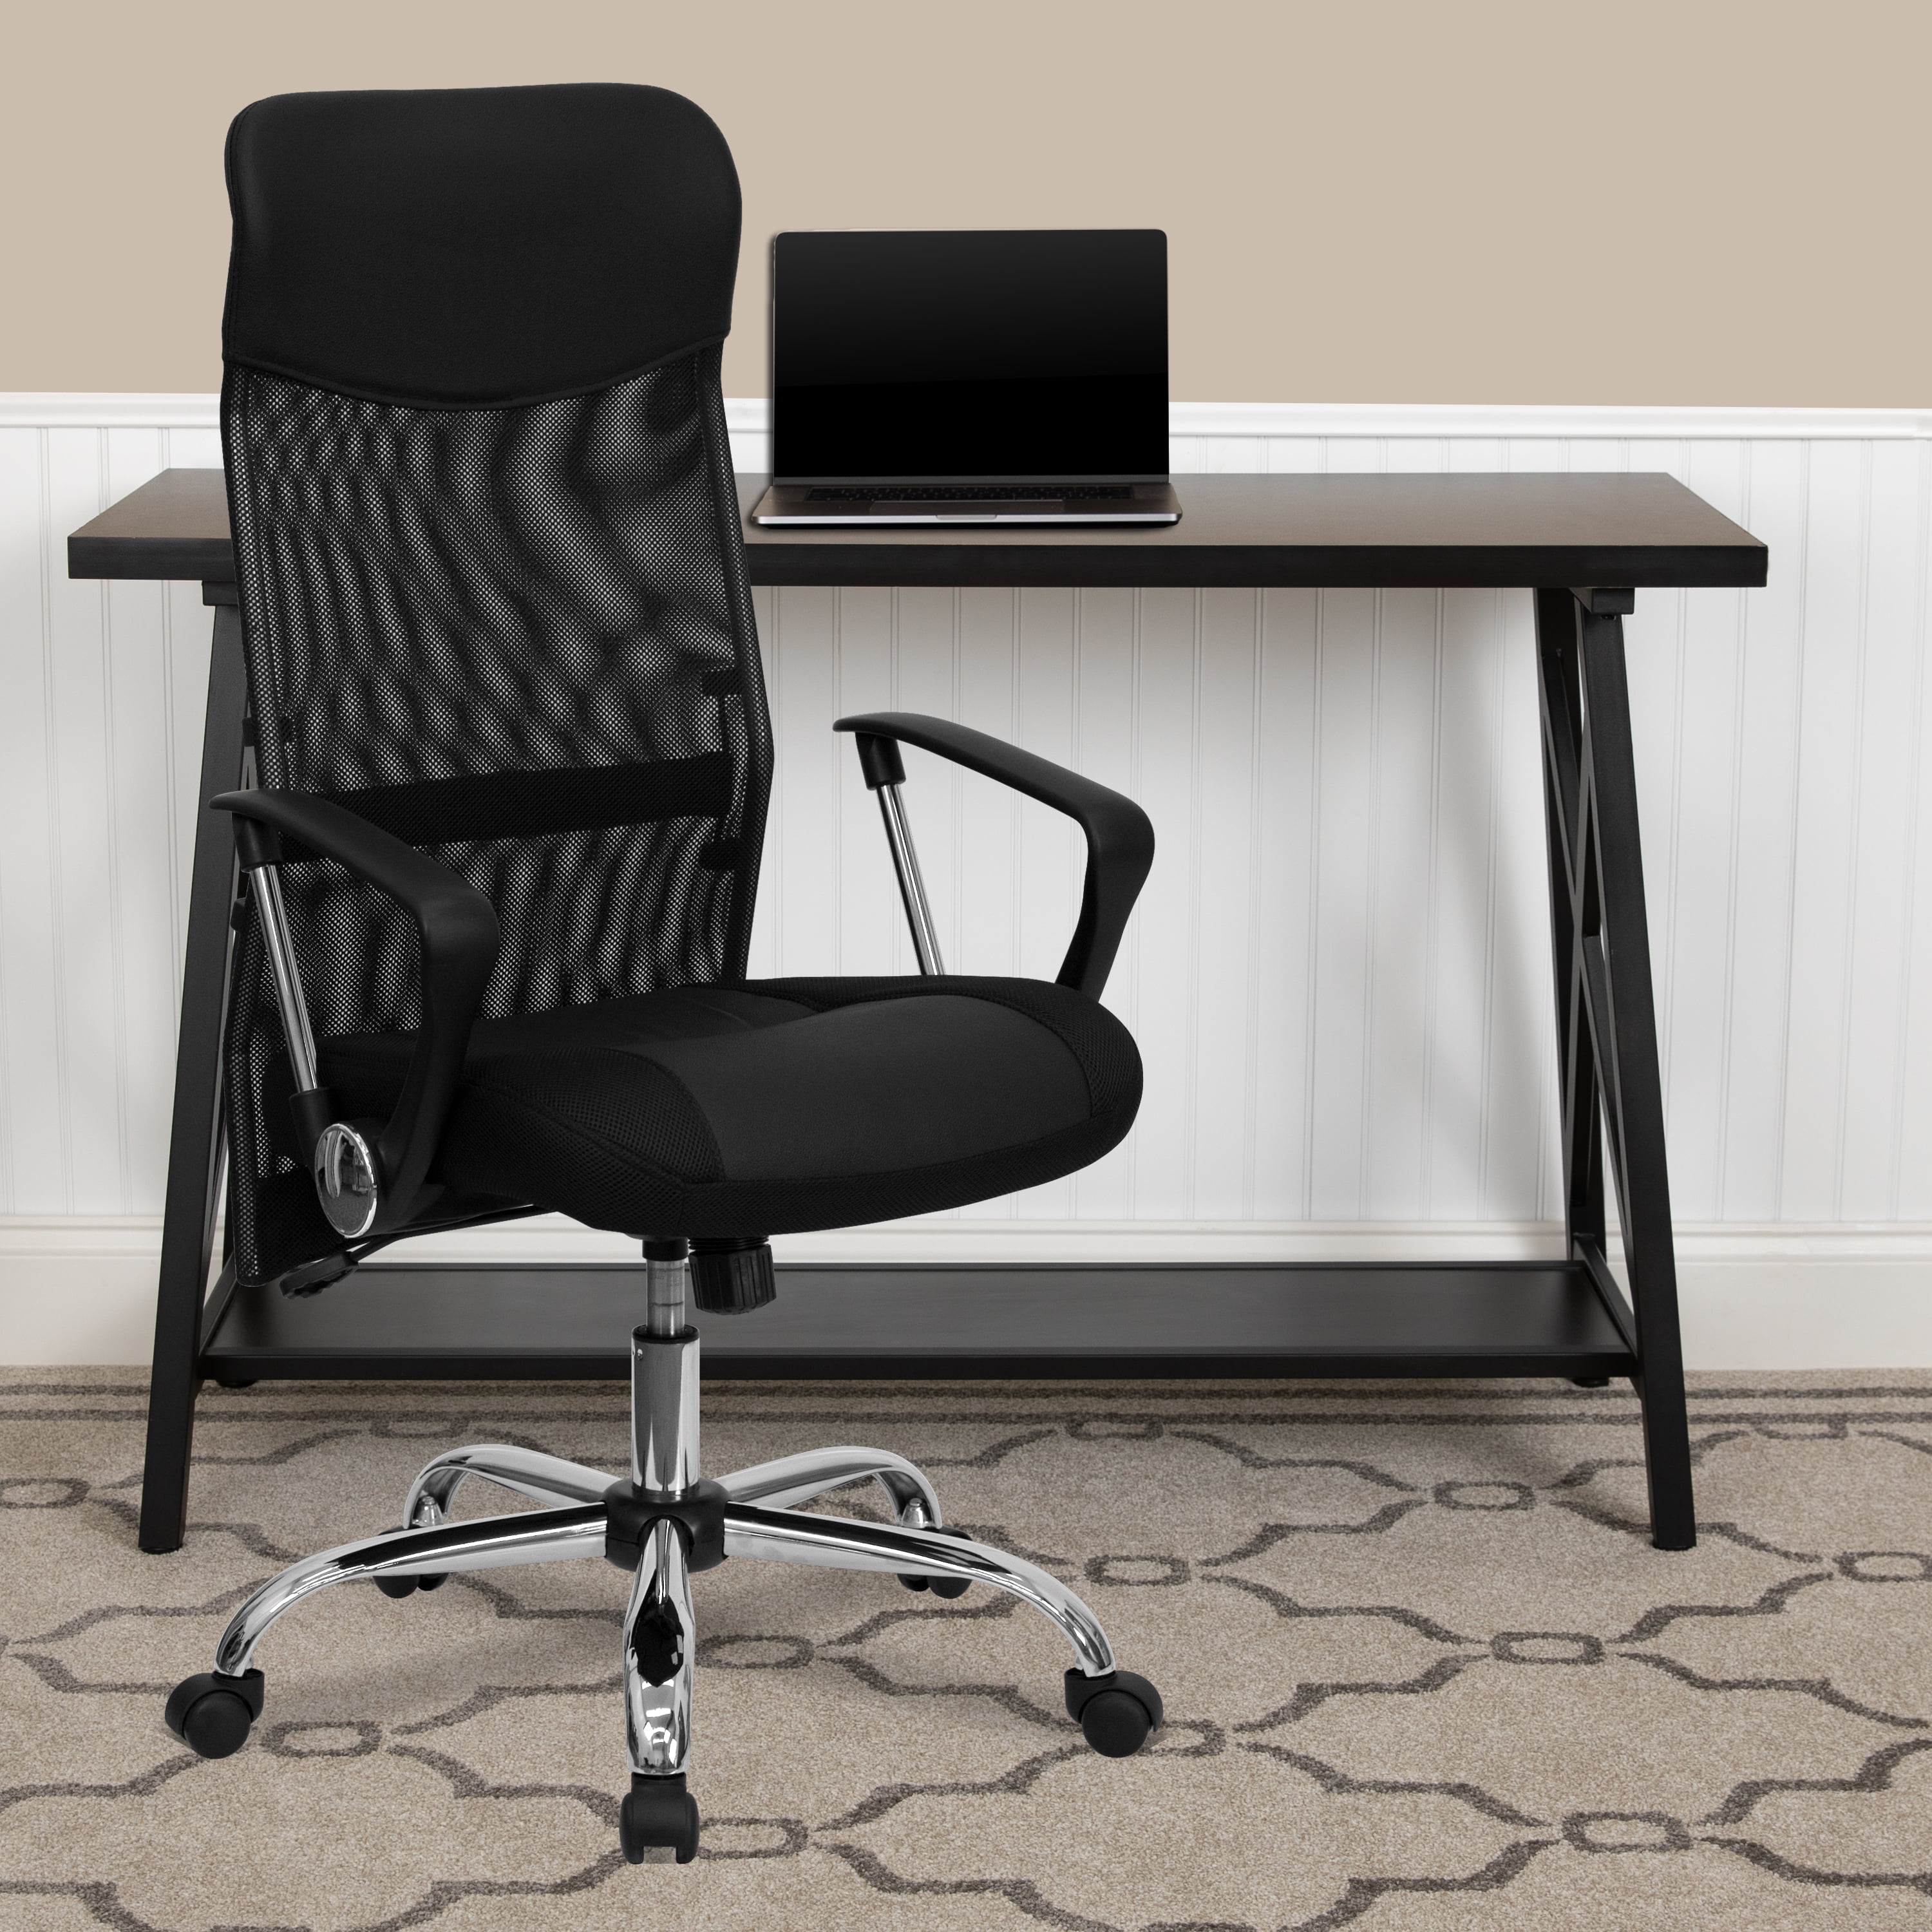 Split Leather High-Back Office Chair with Mesh Back, Black - Walmart